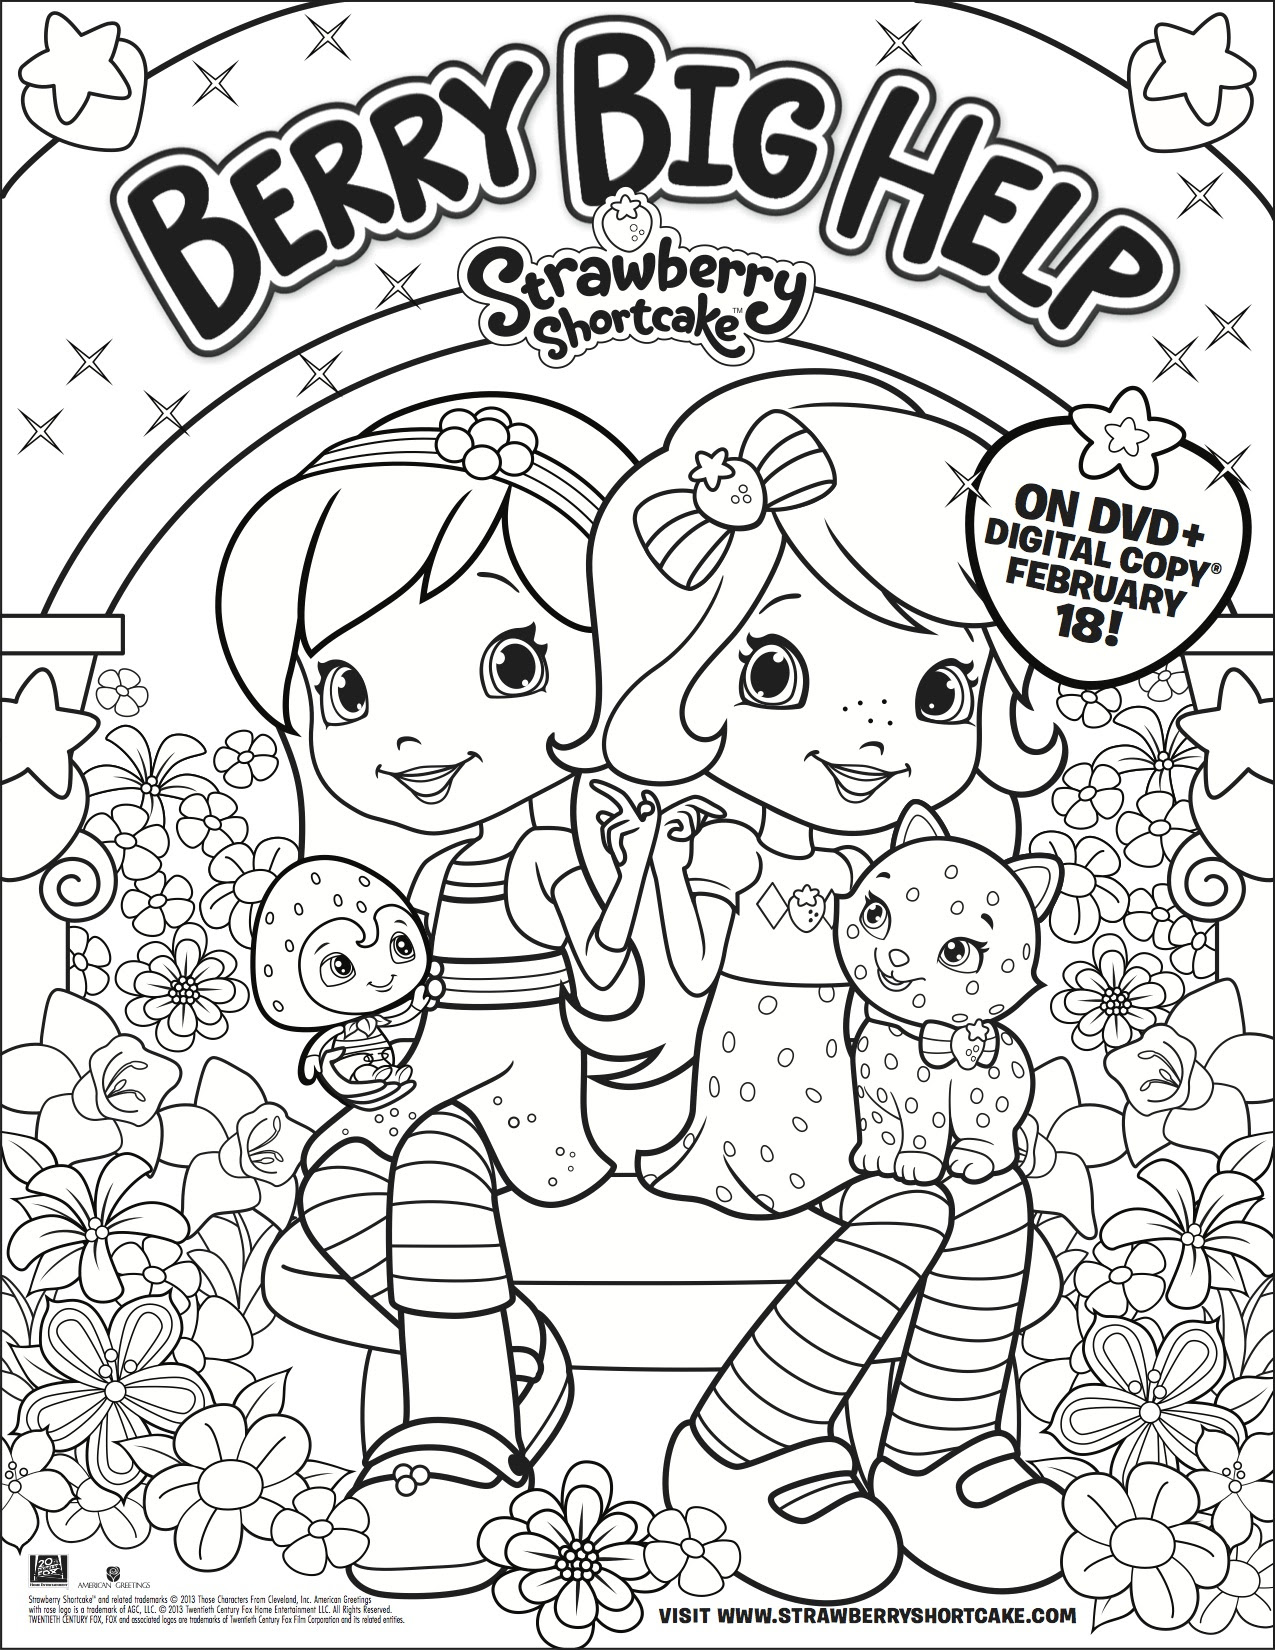 Strawberry Shortcake Coloring Page Long Wait For Isabella